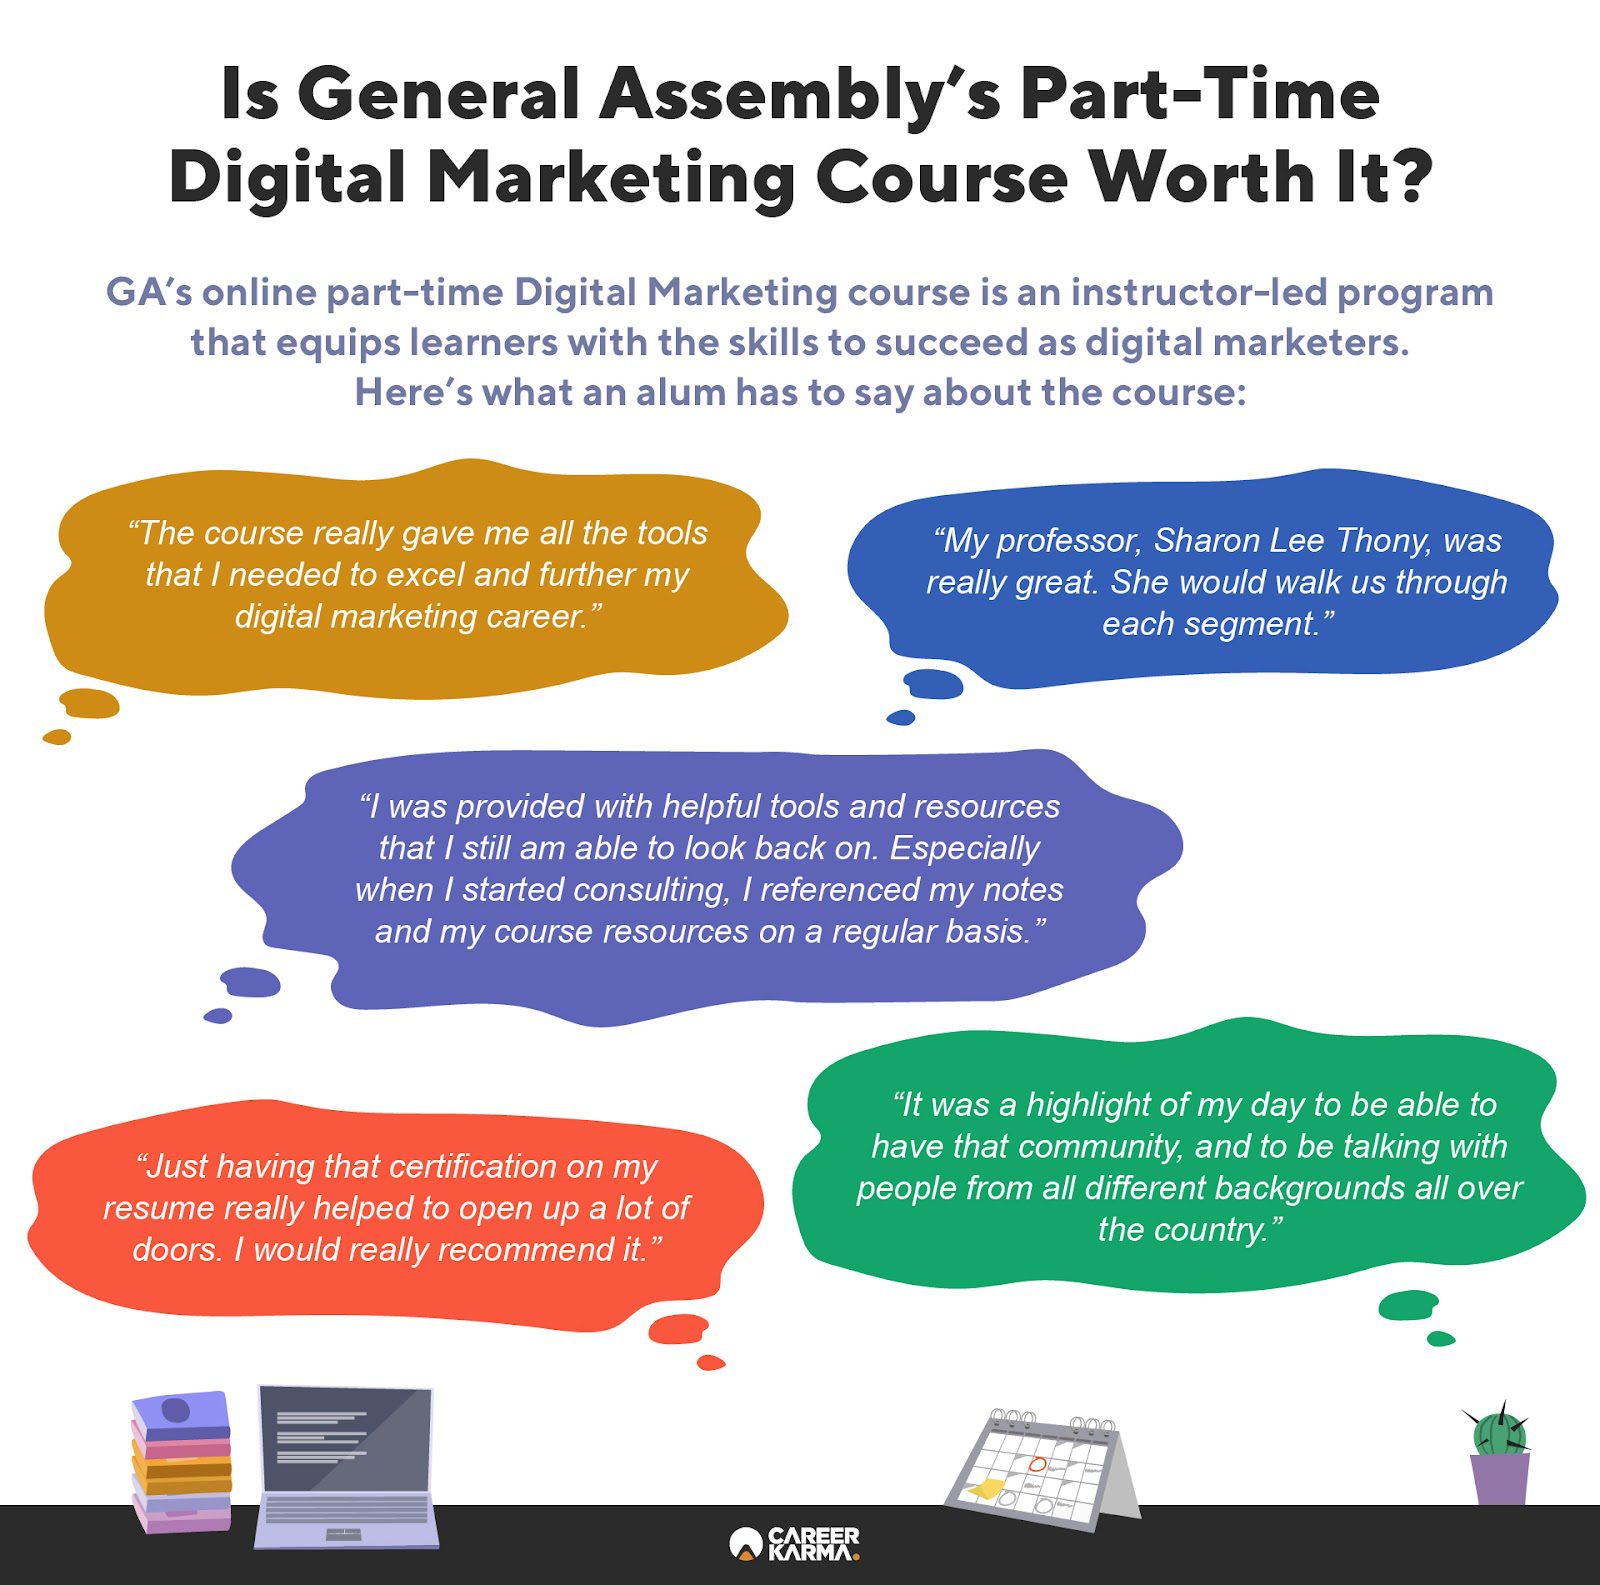 An infographic that features a student’s review of General Assembly’s Part-time Digital Marketing Course